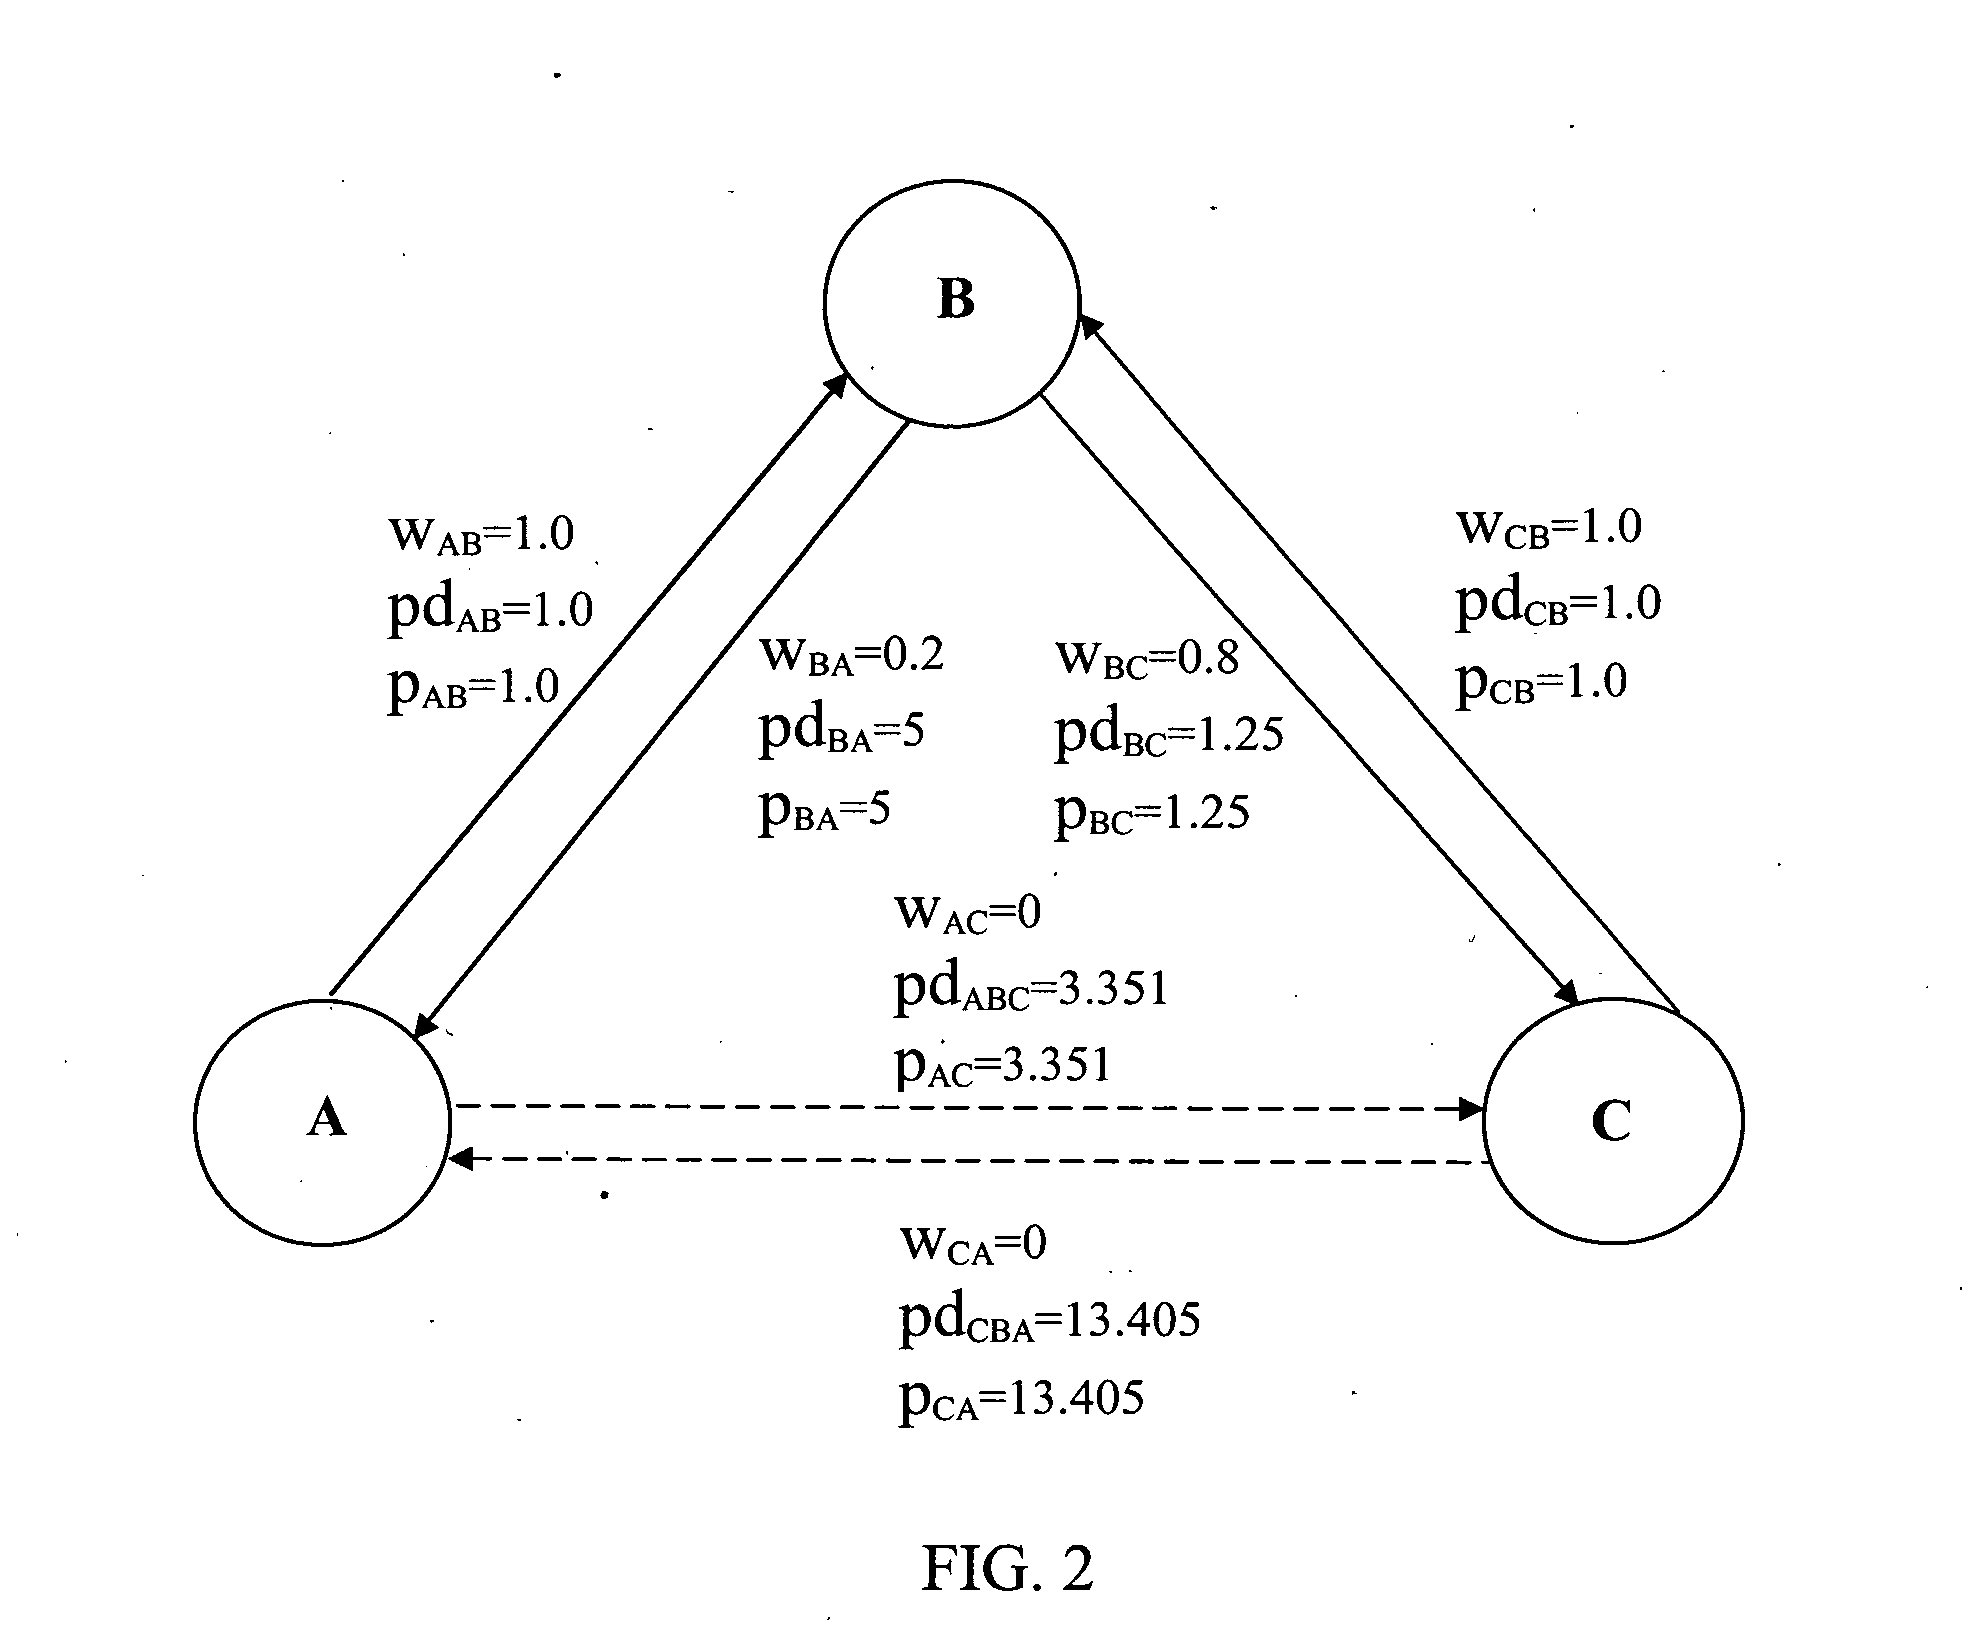 Method for calculating distances between users in a social graph